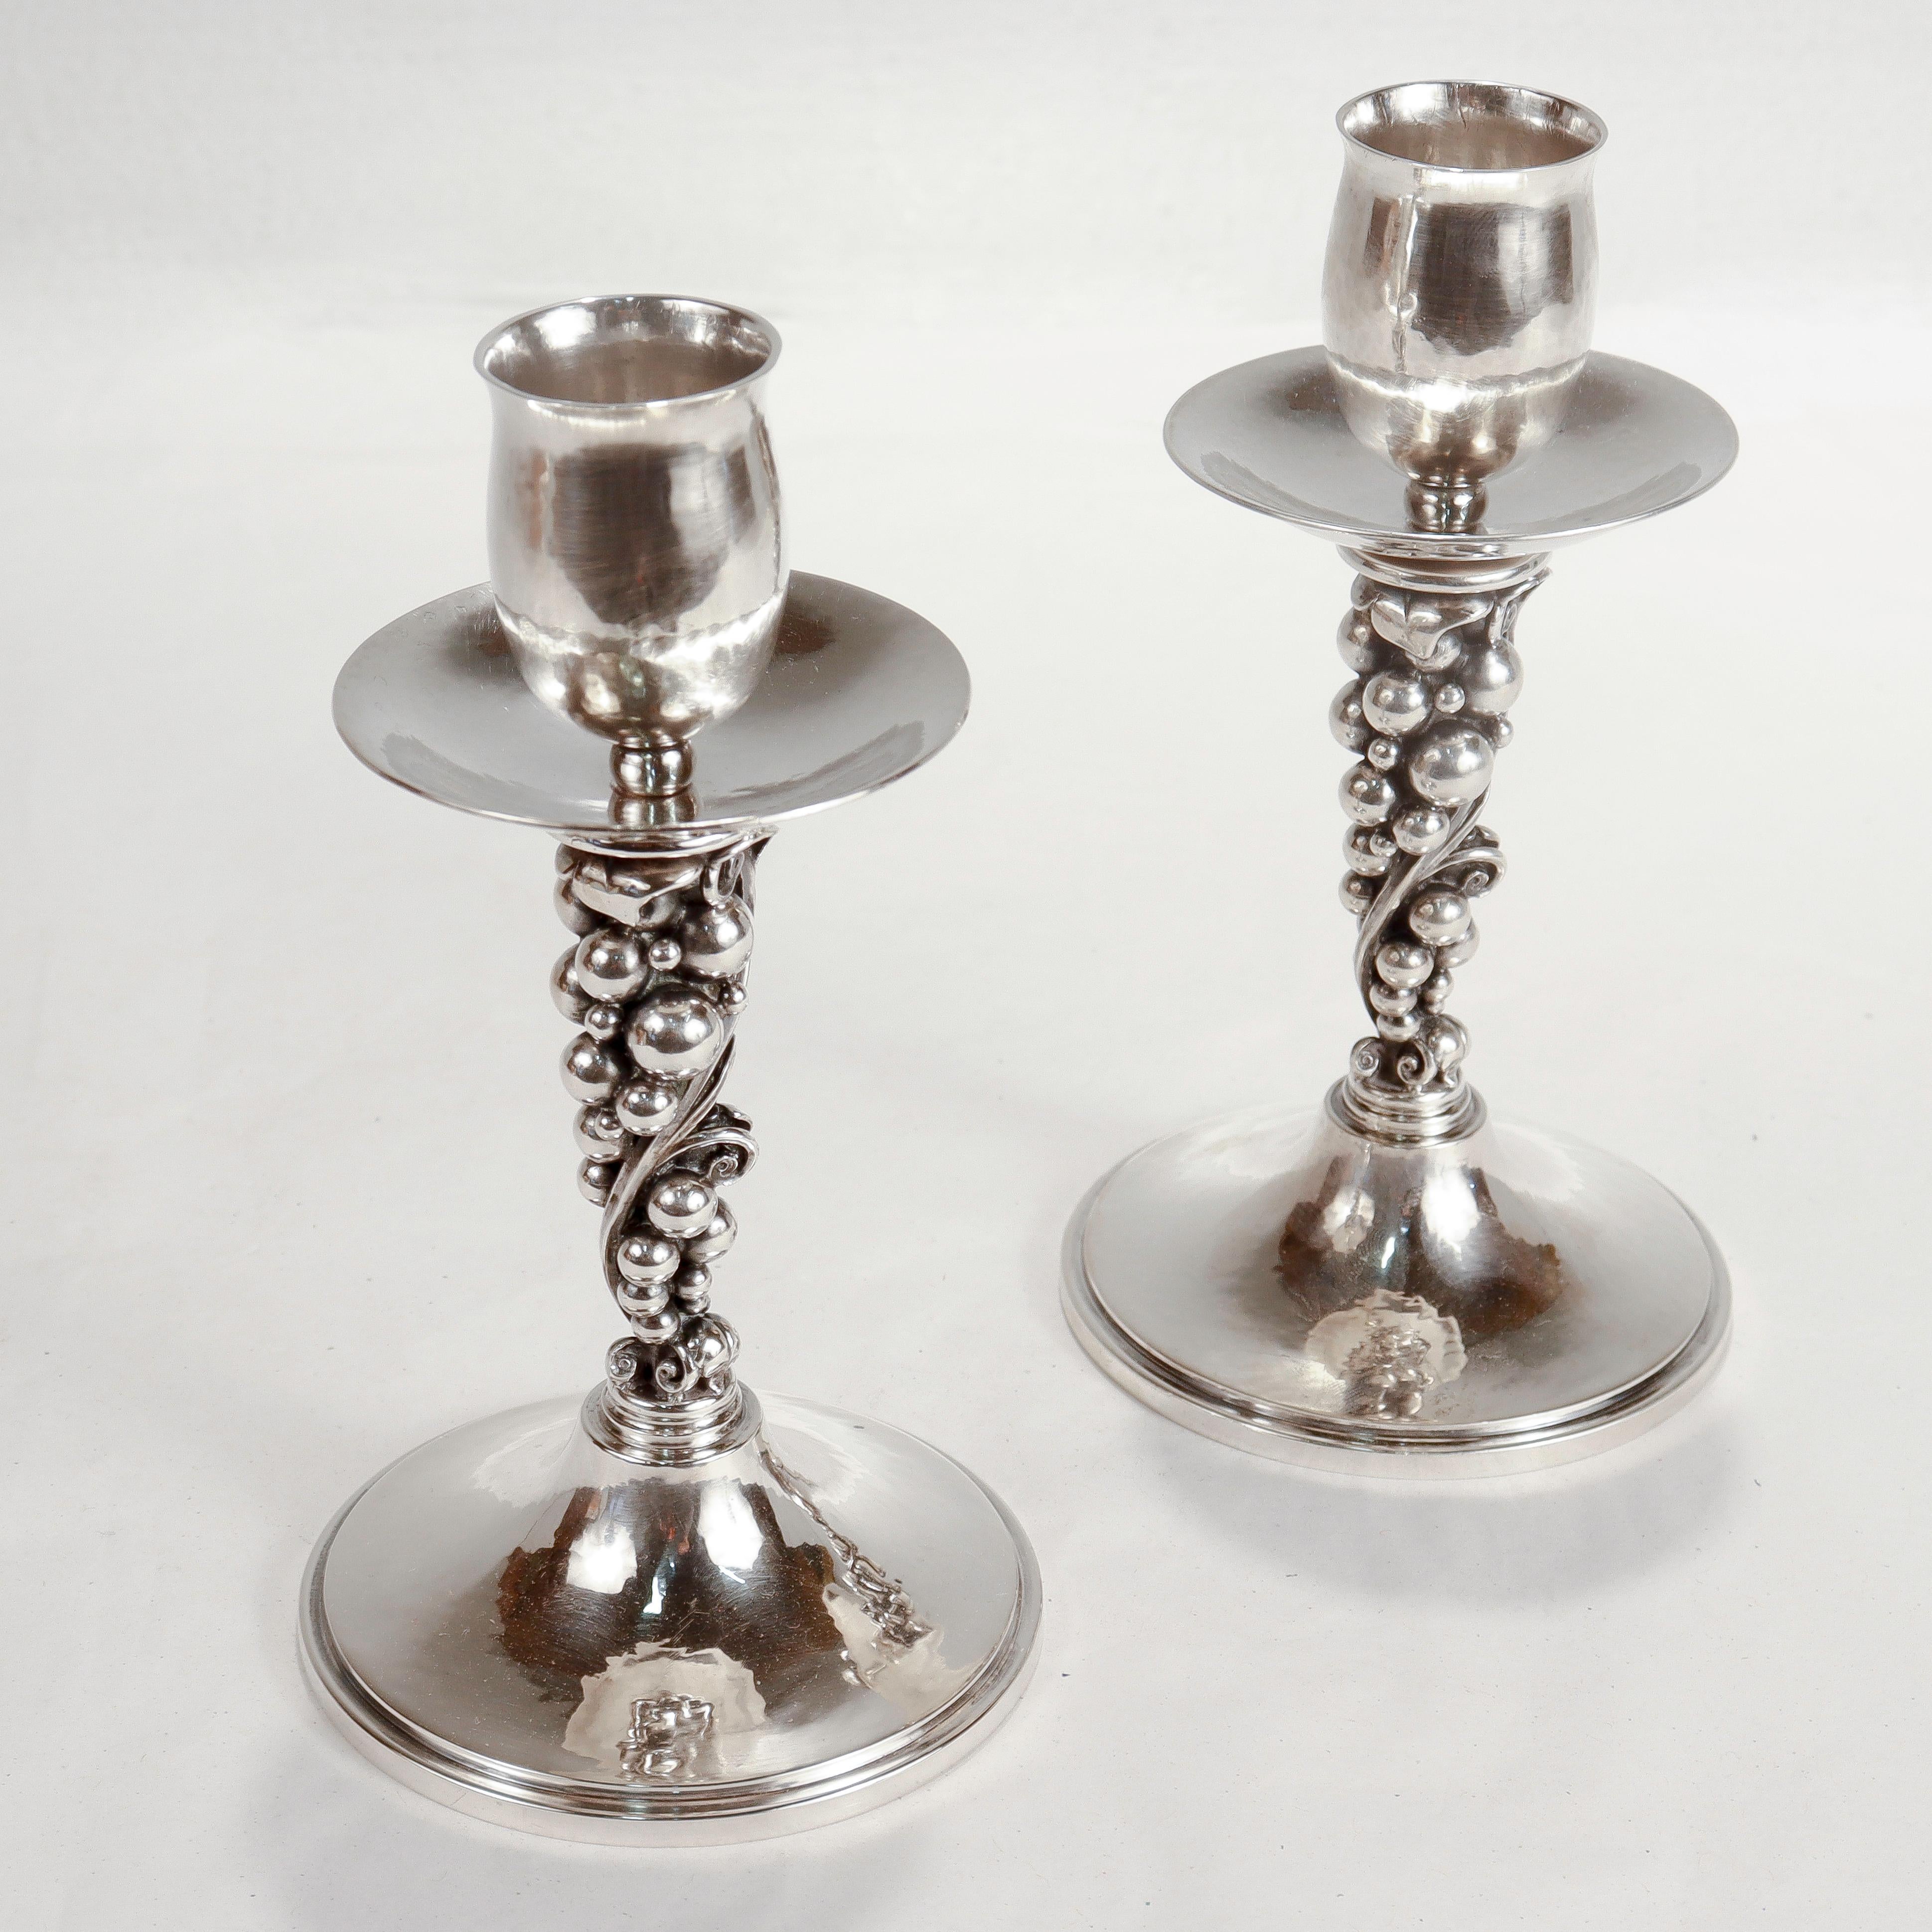 Pair of Signed Danish Modern Sterling Silver Grapes Candlesticks by Aage Weimar For Sale 1